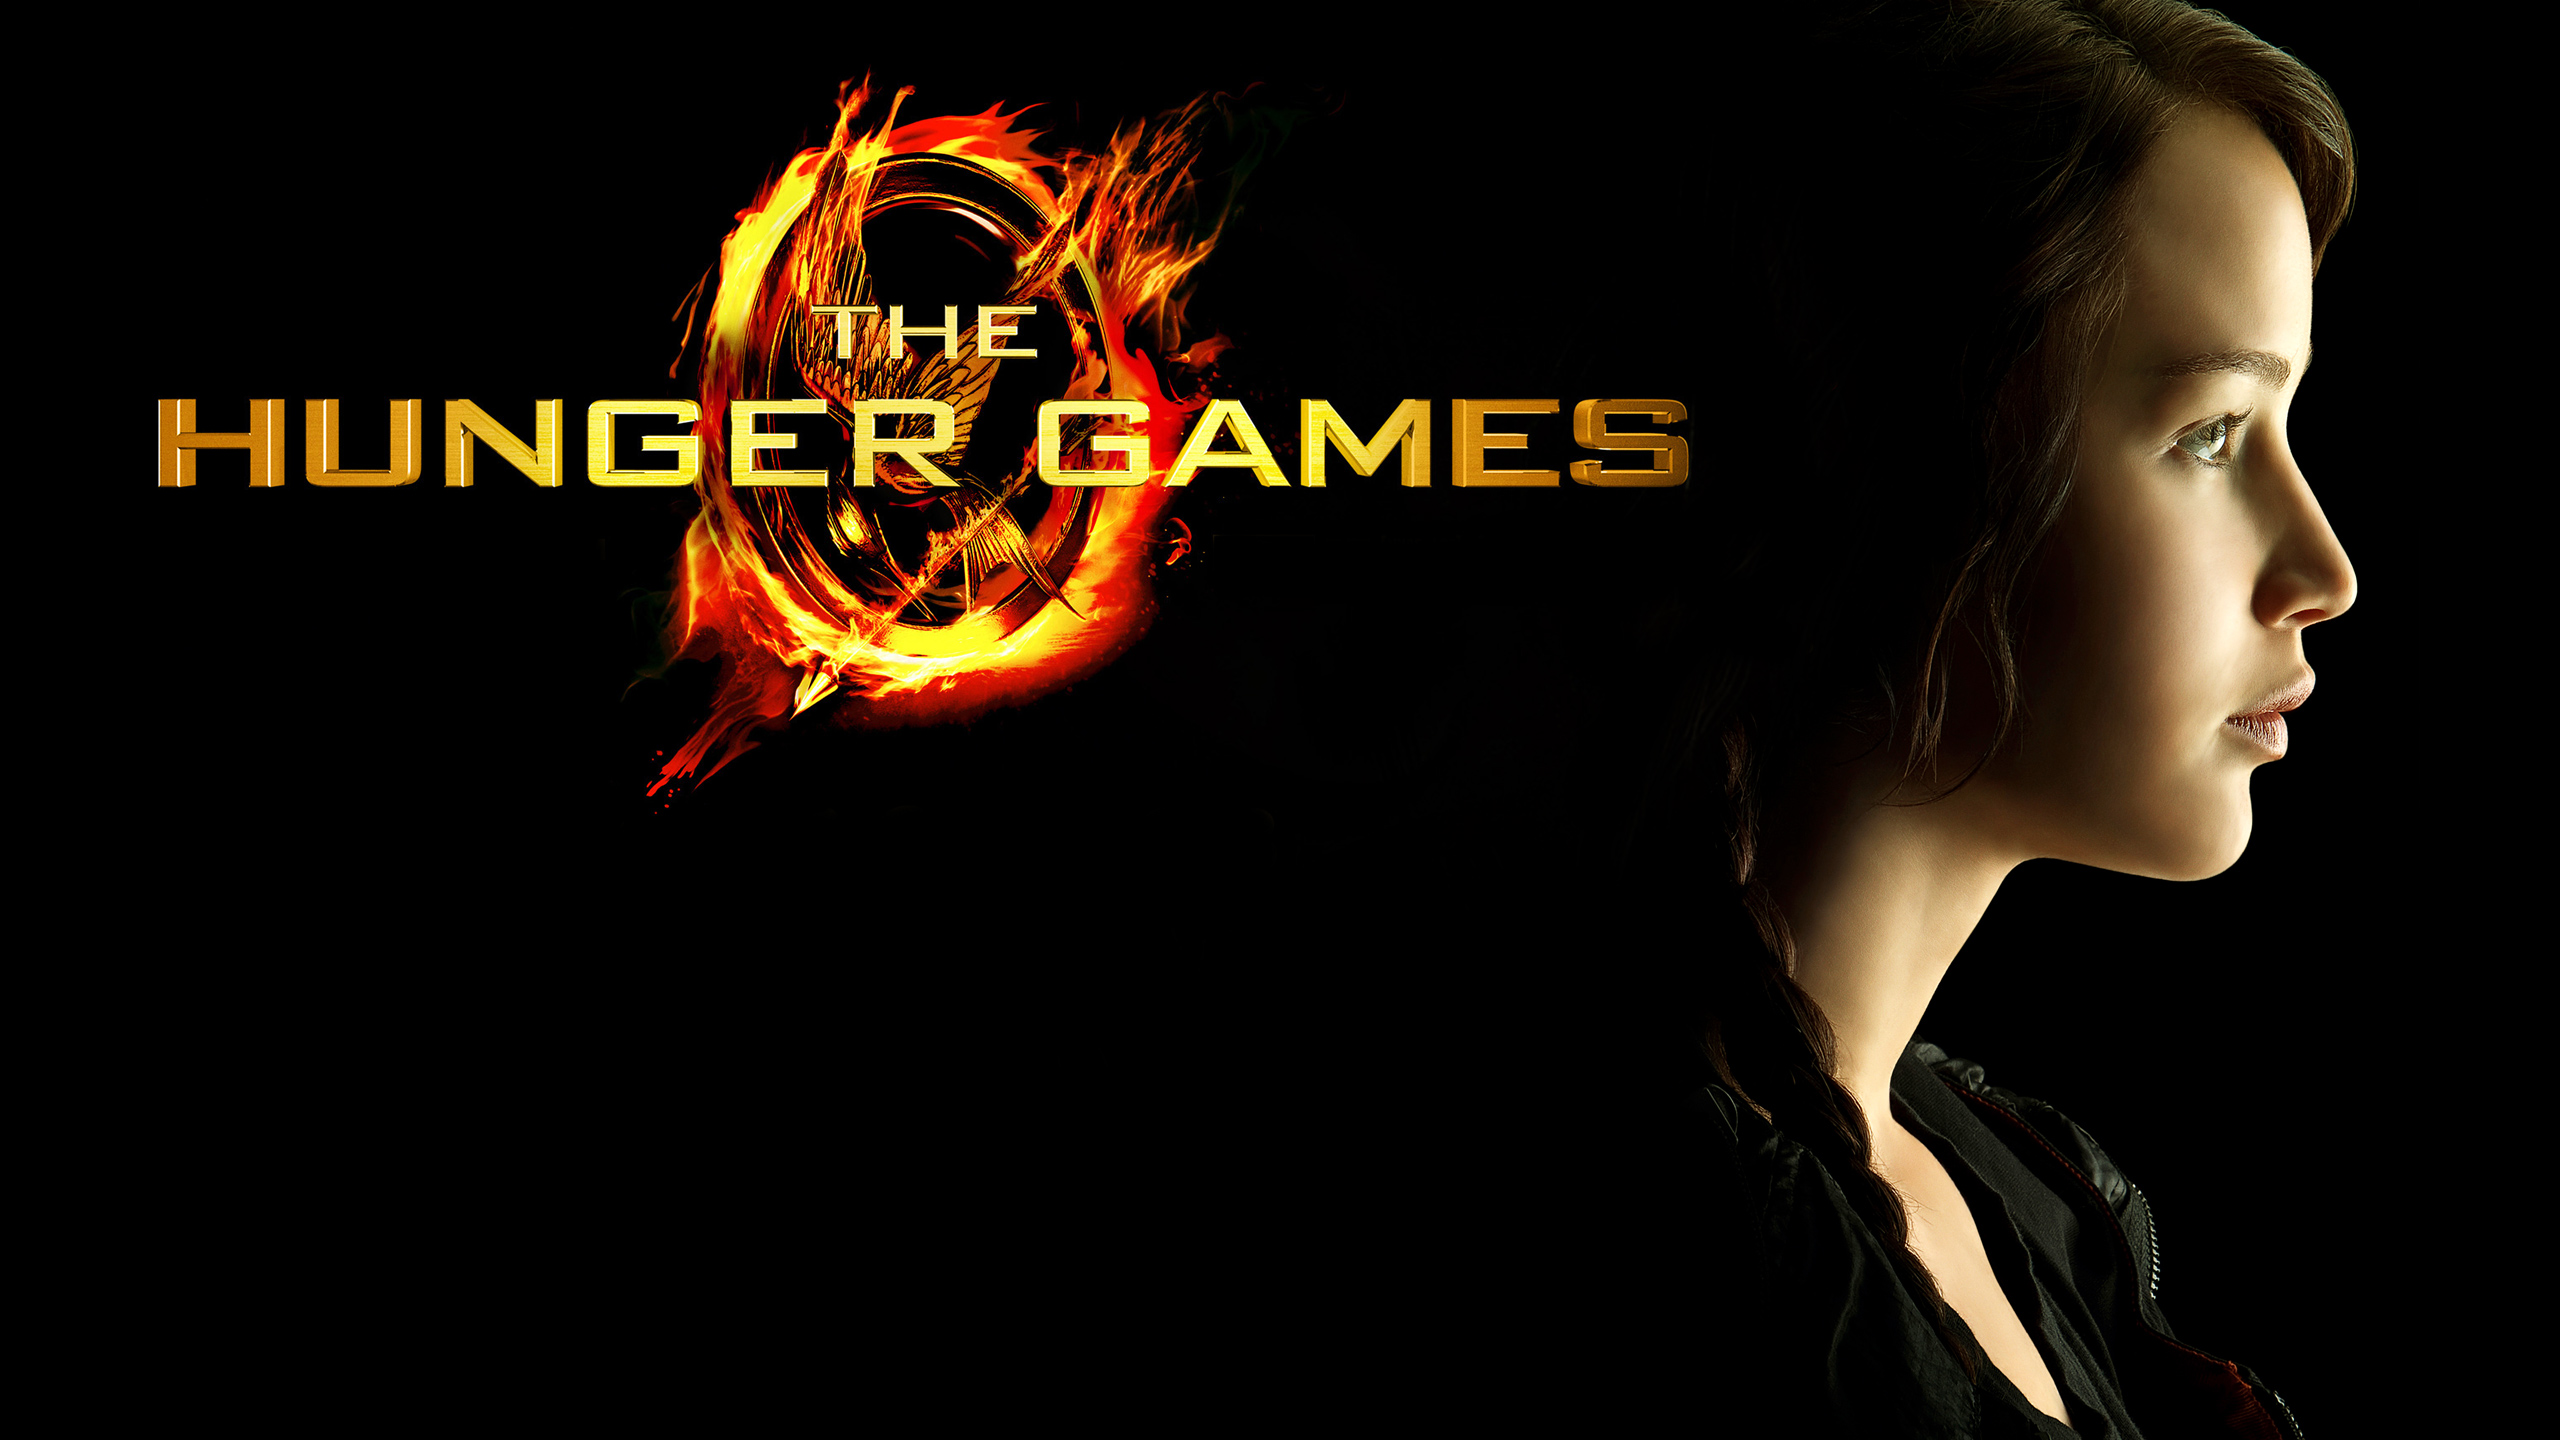 Jennifer Lawrence Hunger Games Wallpapers HD Wallpapers 2560x1440